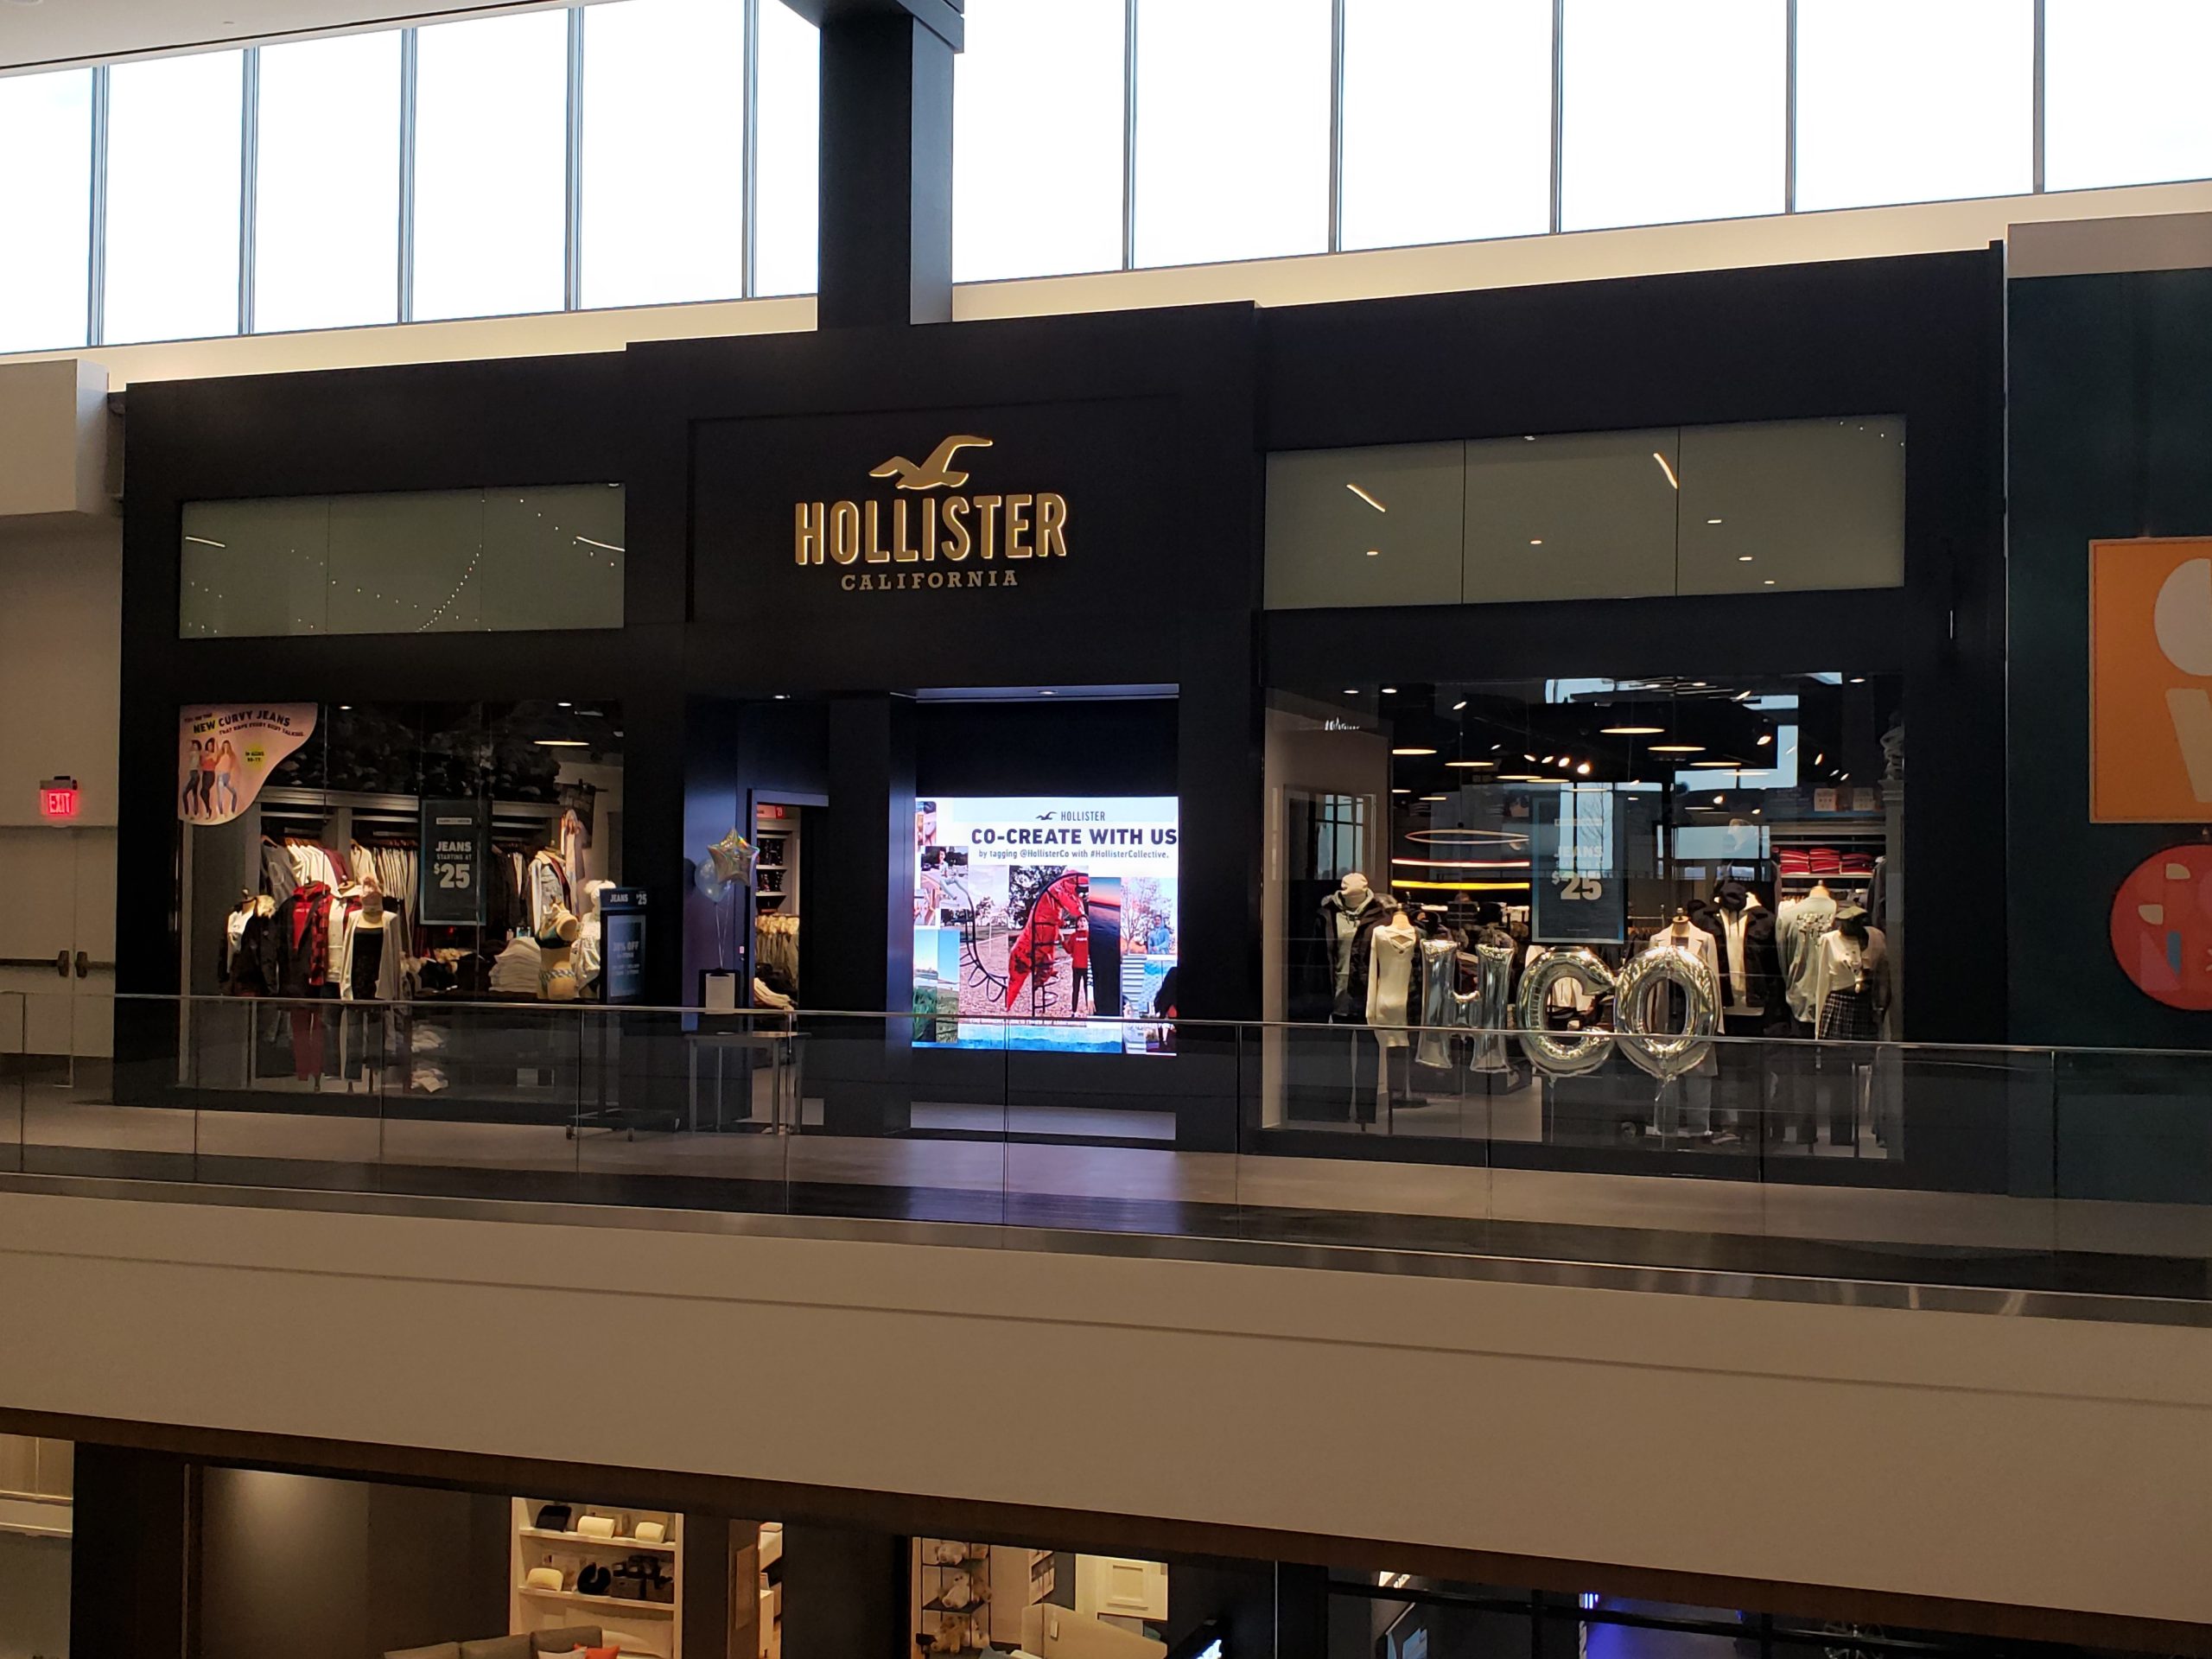 where is hollister located in the mall